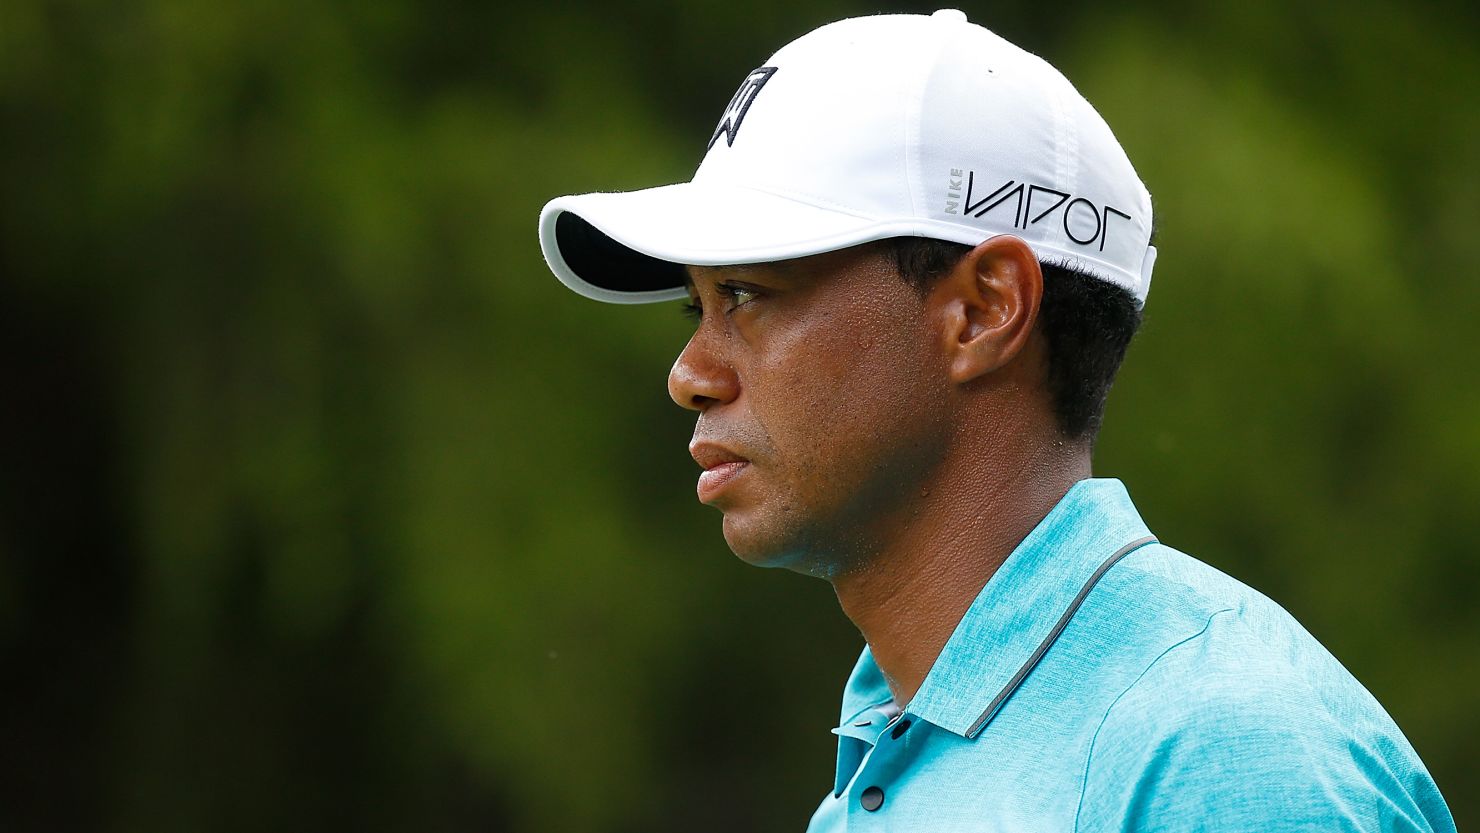 A disconsolate Woods struggled to find his best form during his third round at the Quicken Loans tournament in Virginia.